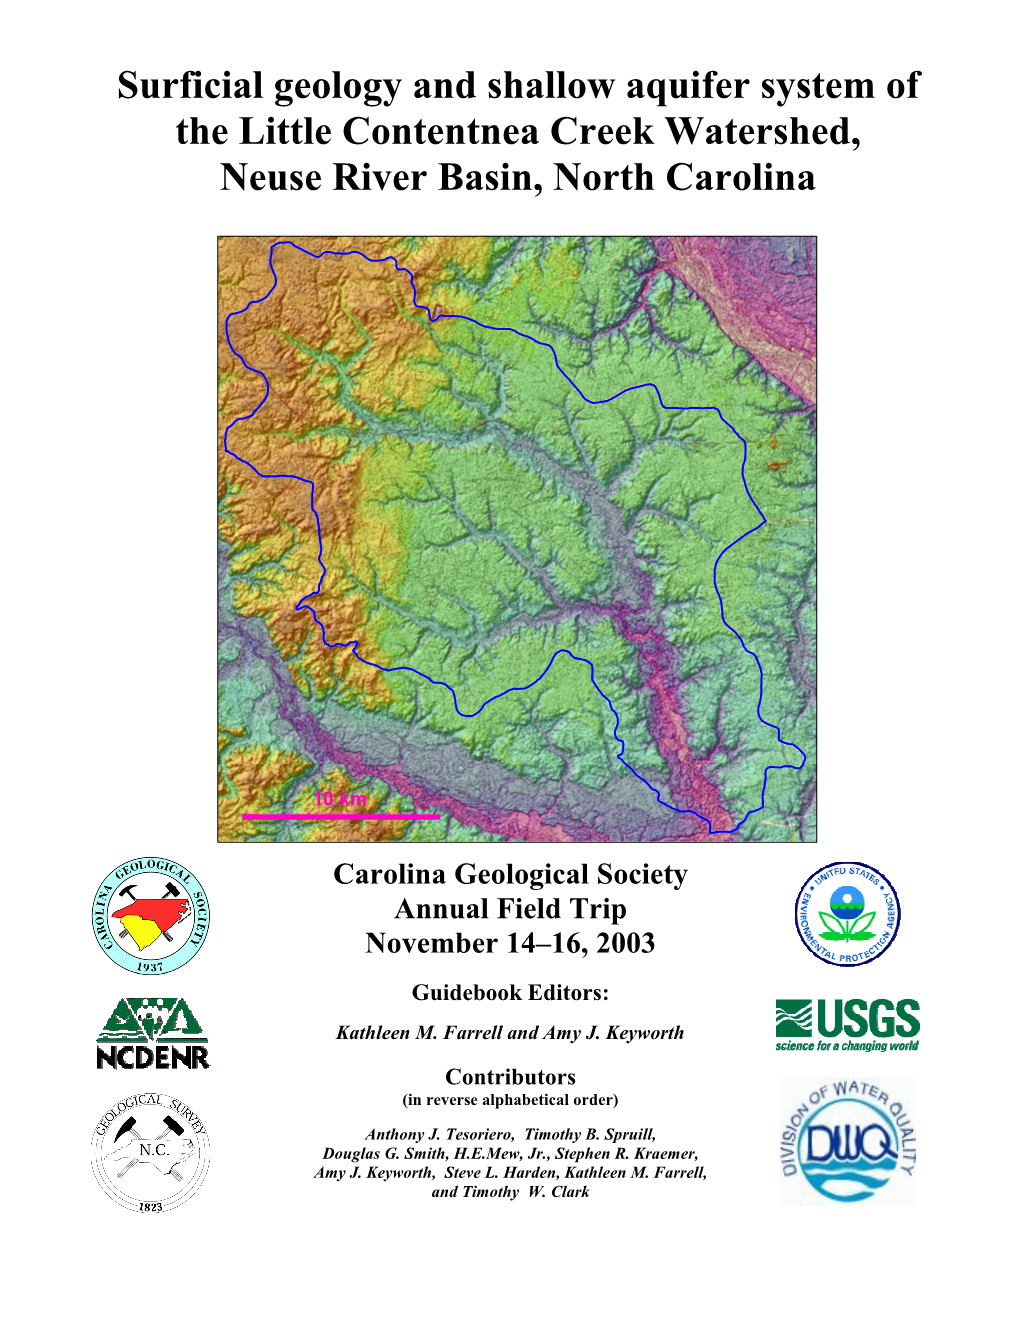 Surficial Geology and Shallow Aquifer System of the Little Contentnea Creek Watershed, Neuse River Basin, North Carolina